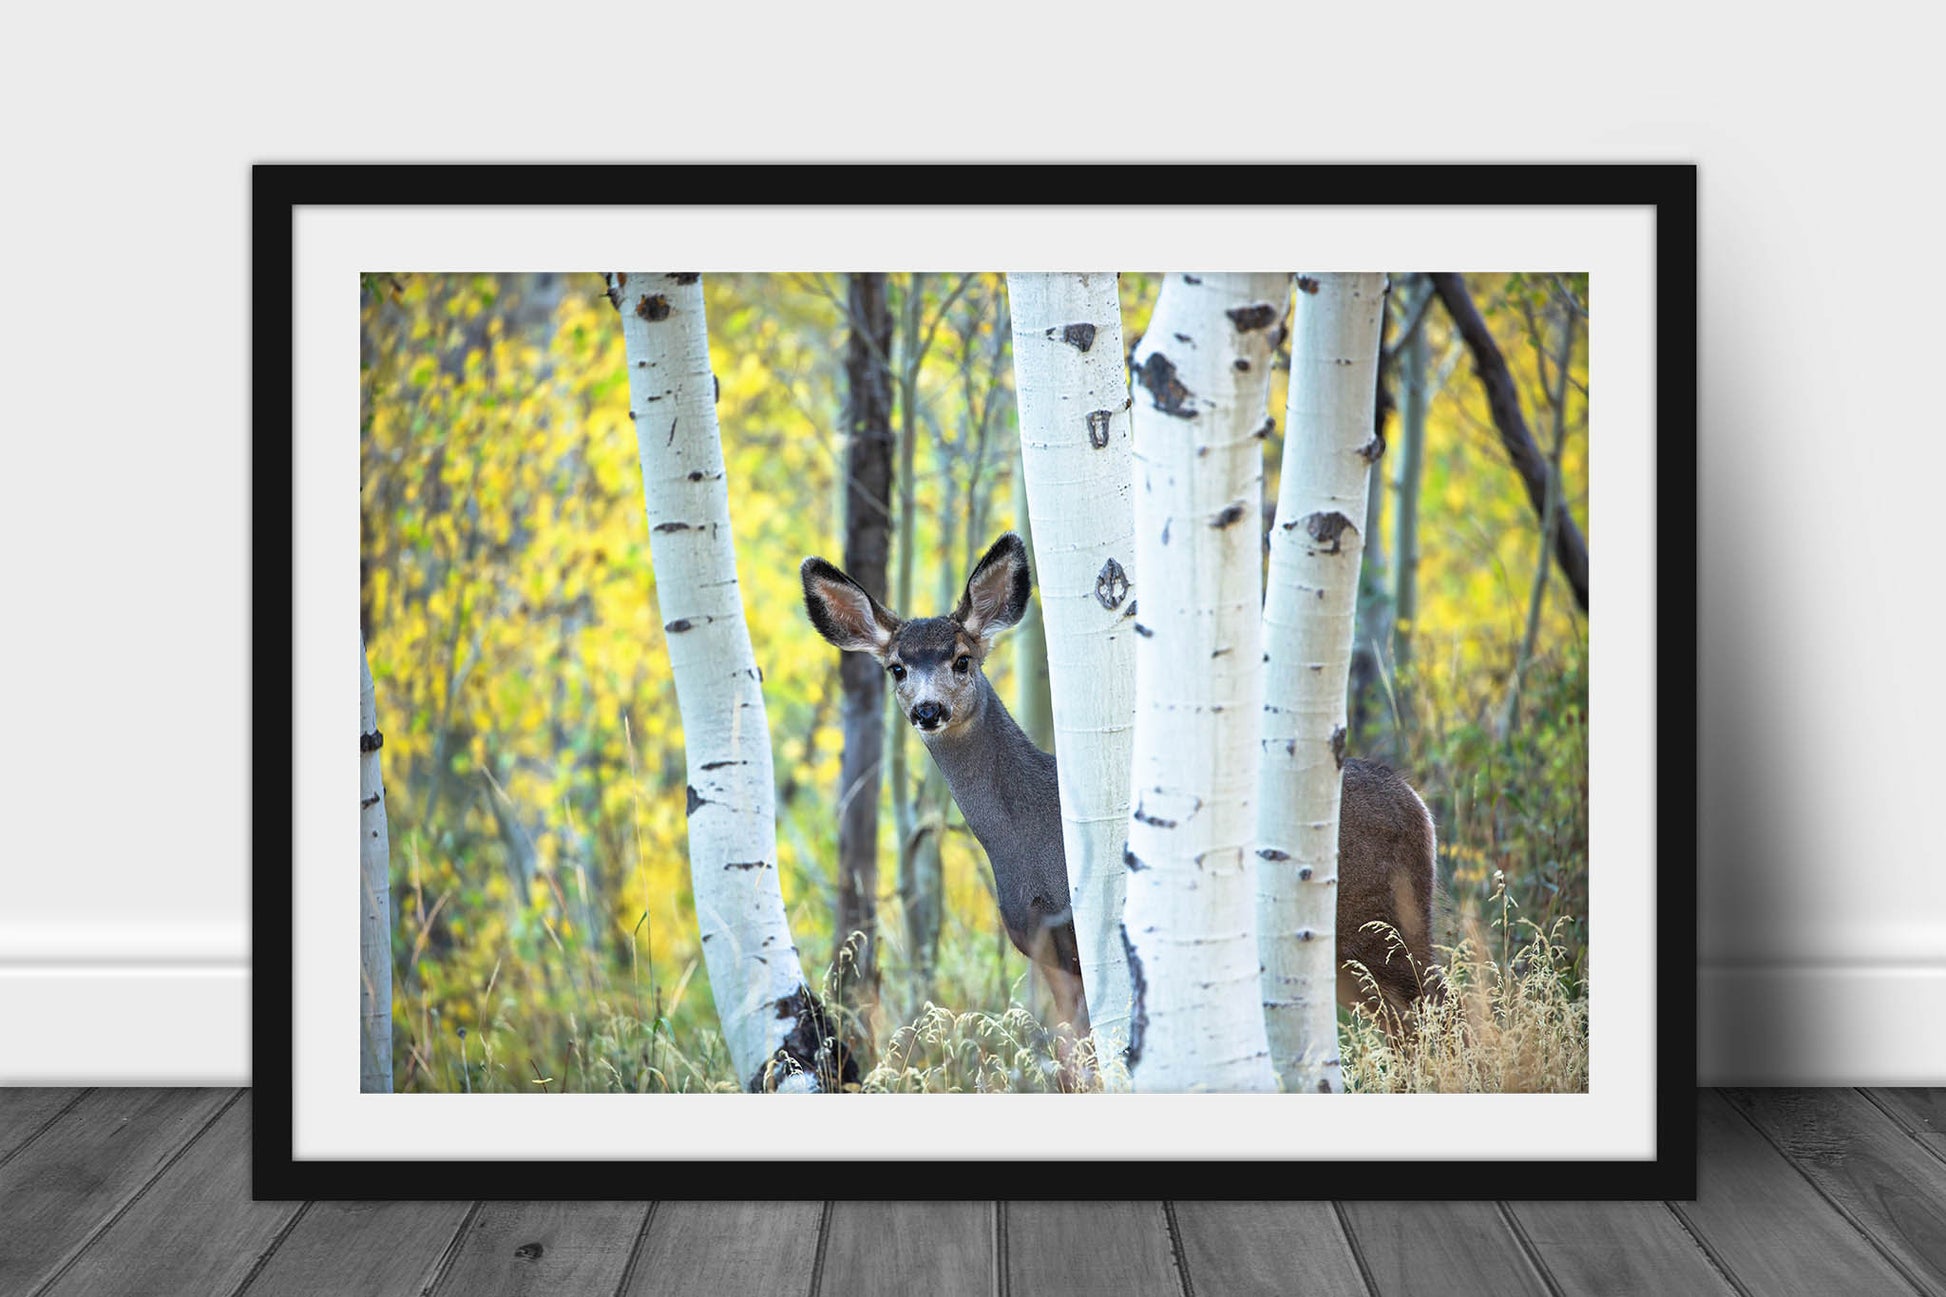 Framed and matted wildlife print of an adolescent mule deer hiding behind aspen trees on an autumn day at the Maroon Bells near Aspen, Colorado by Sean Ramsey of Southern Plains Photography.